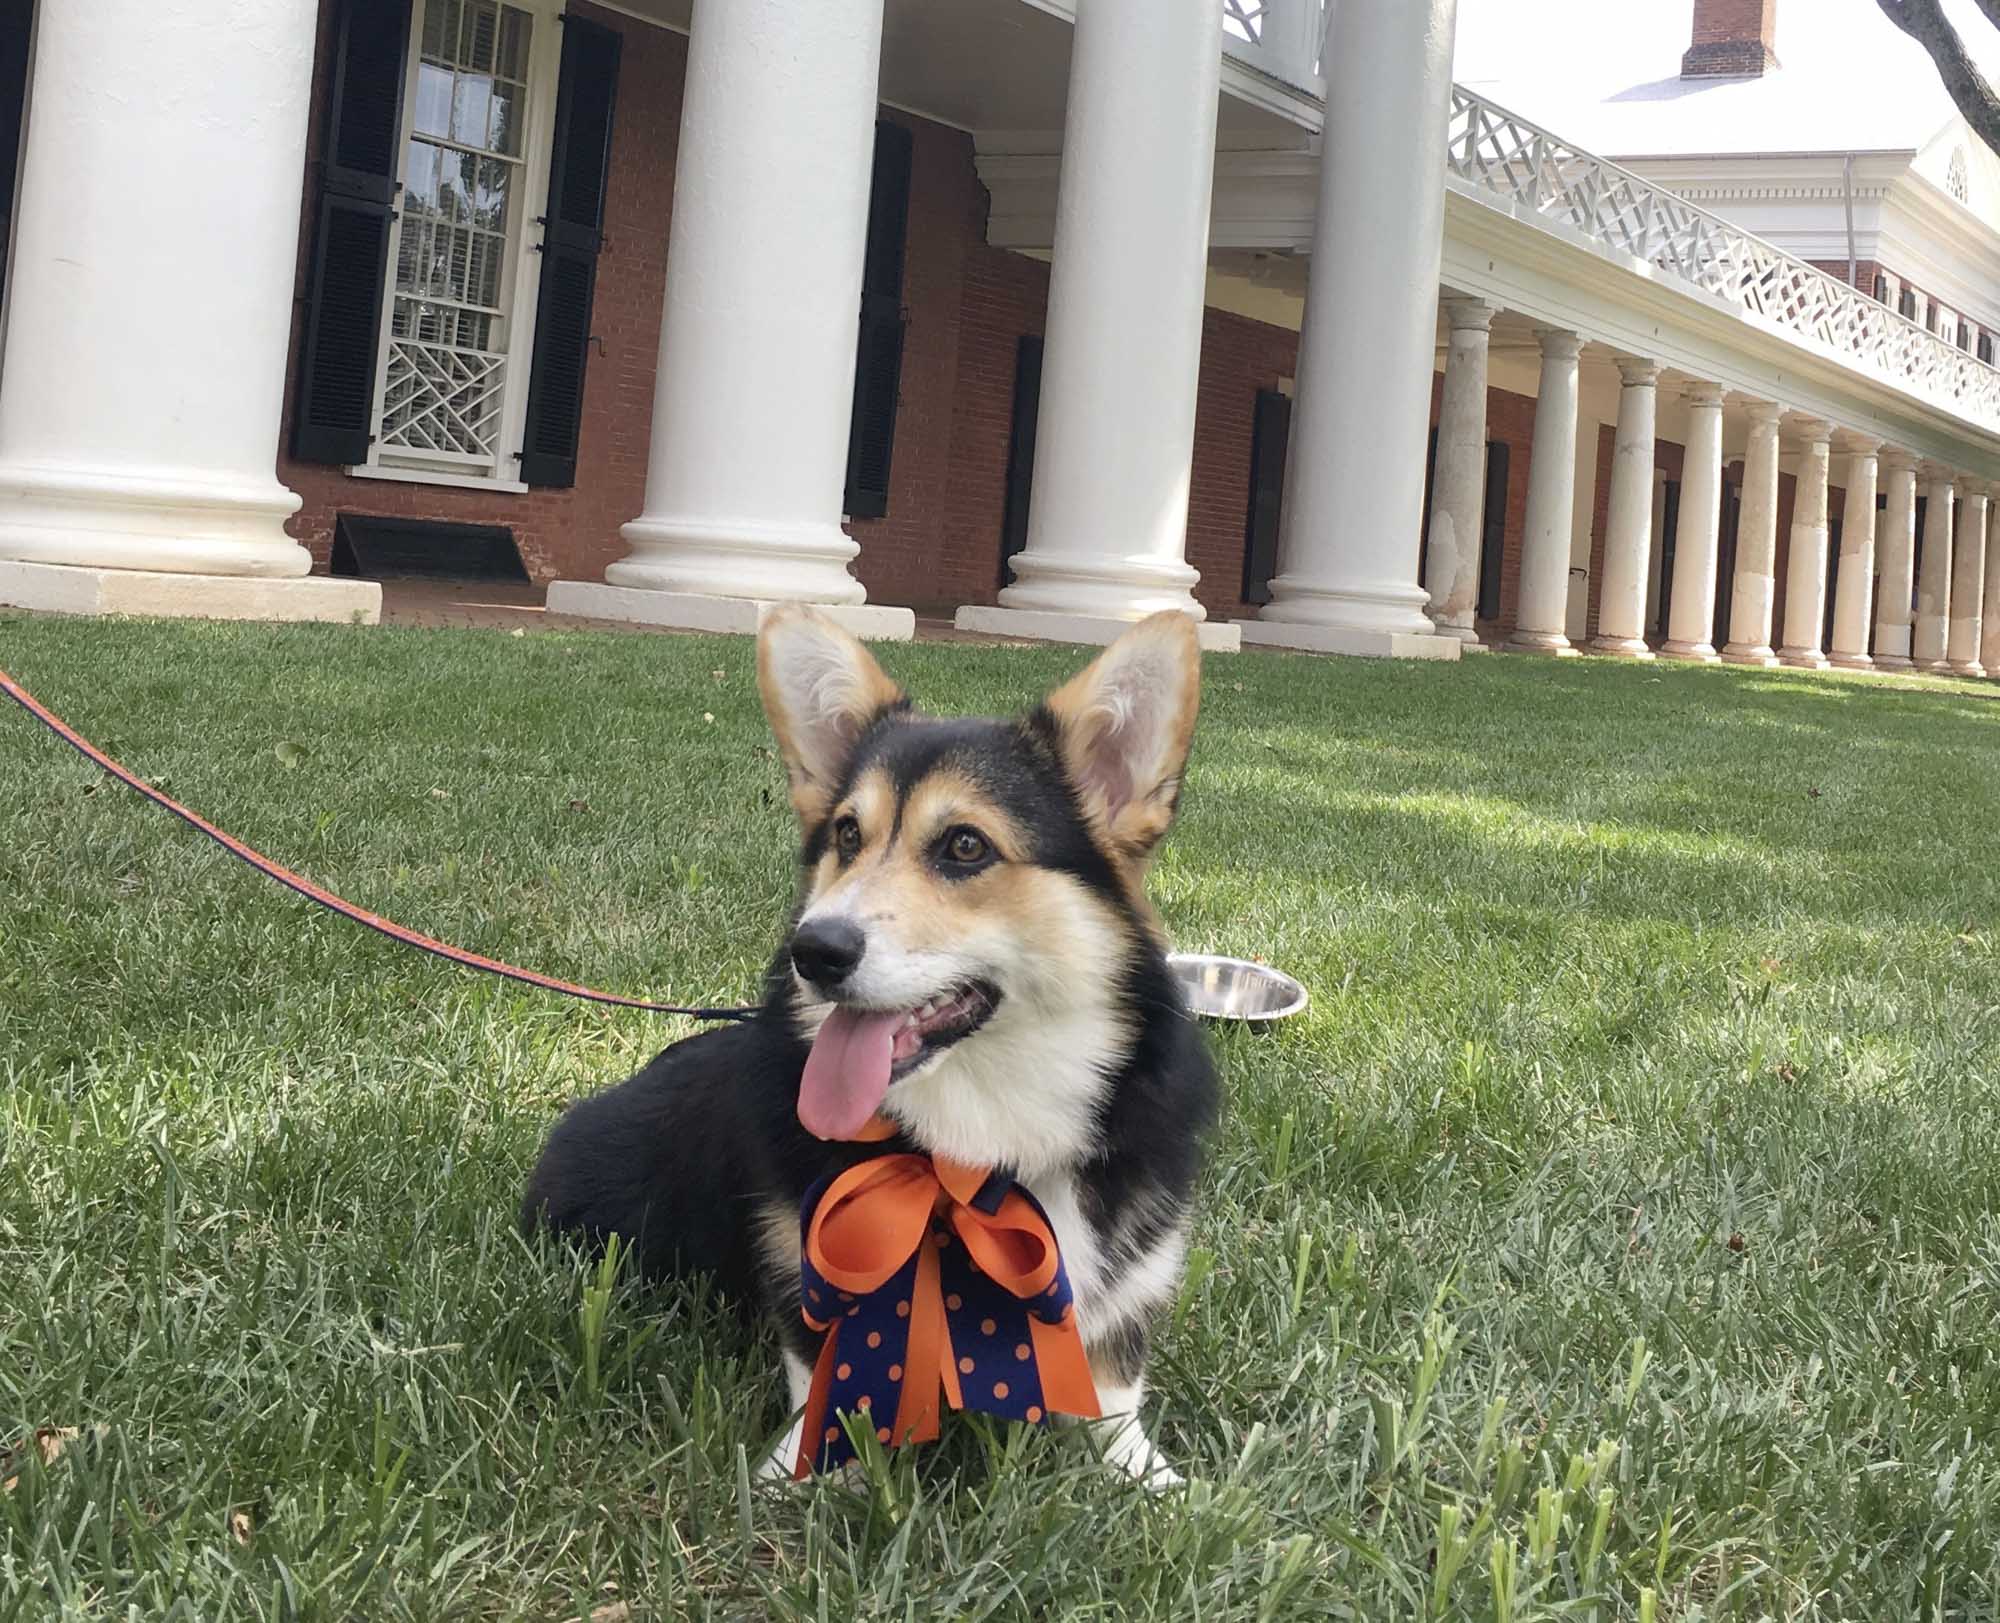 A black, brown and white corgi in an orange and blue bowtie sits on the Lawn